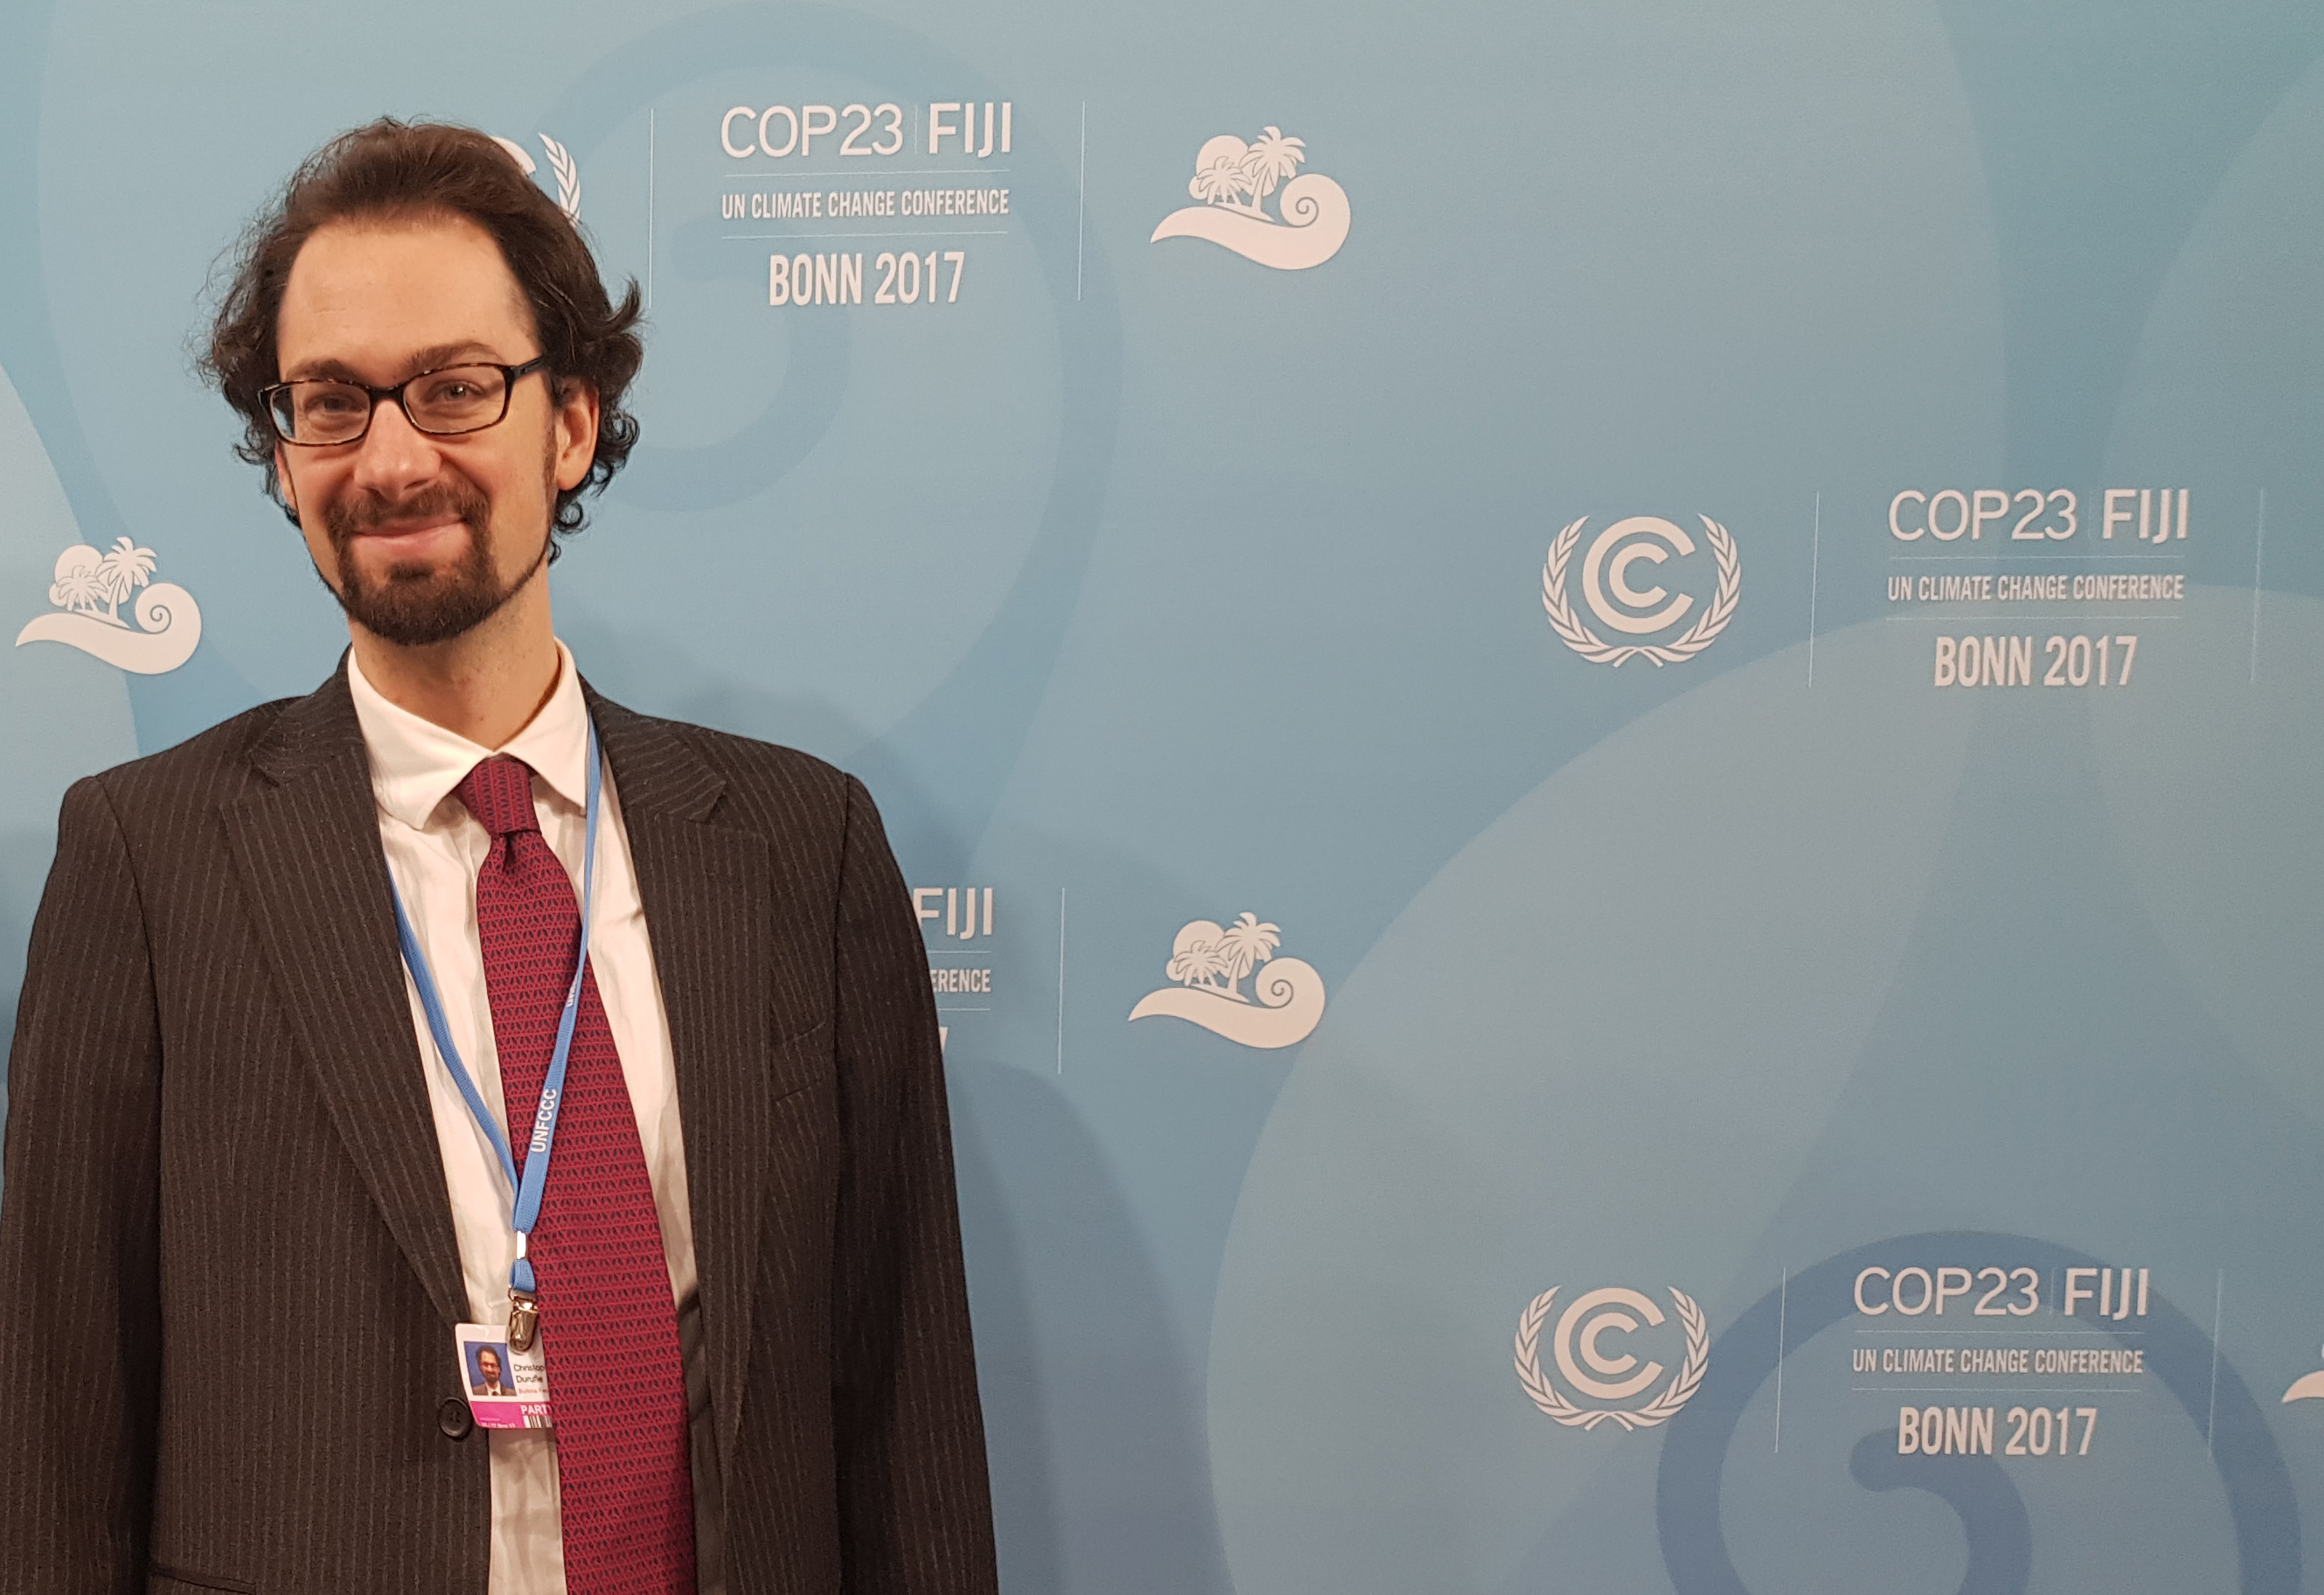 Christopher Campbell-Duruflé at the twenty-third session of the Conference of the Parties (COP 23)